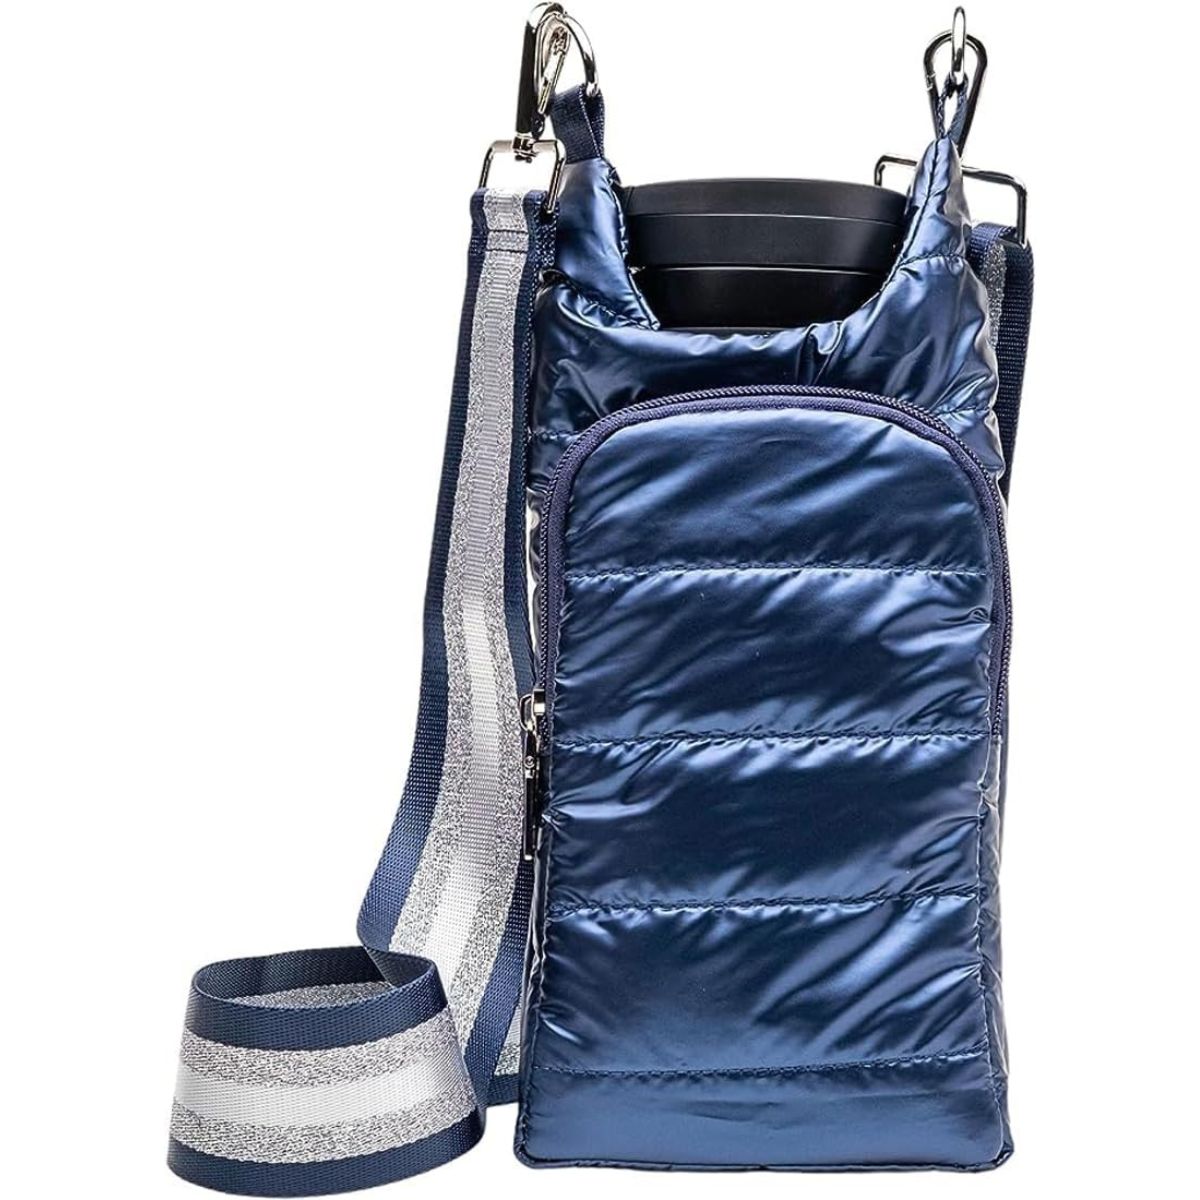 Crossbody HydroBag for Water Bottle